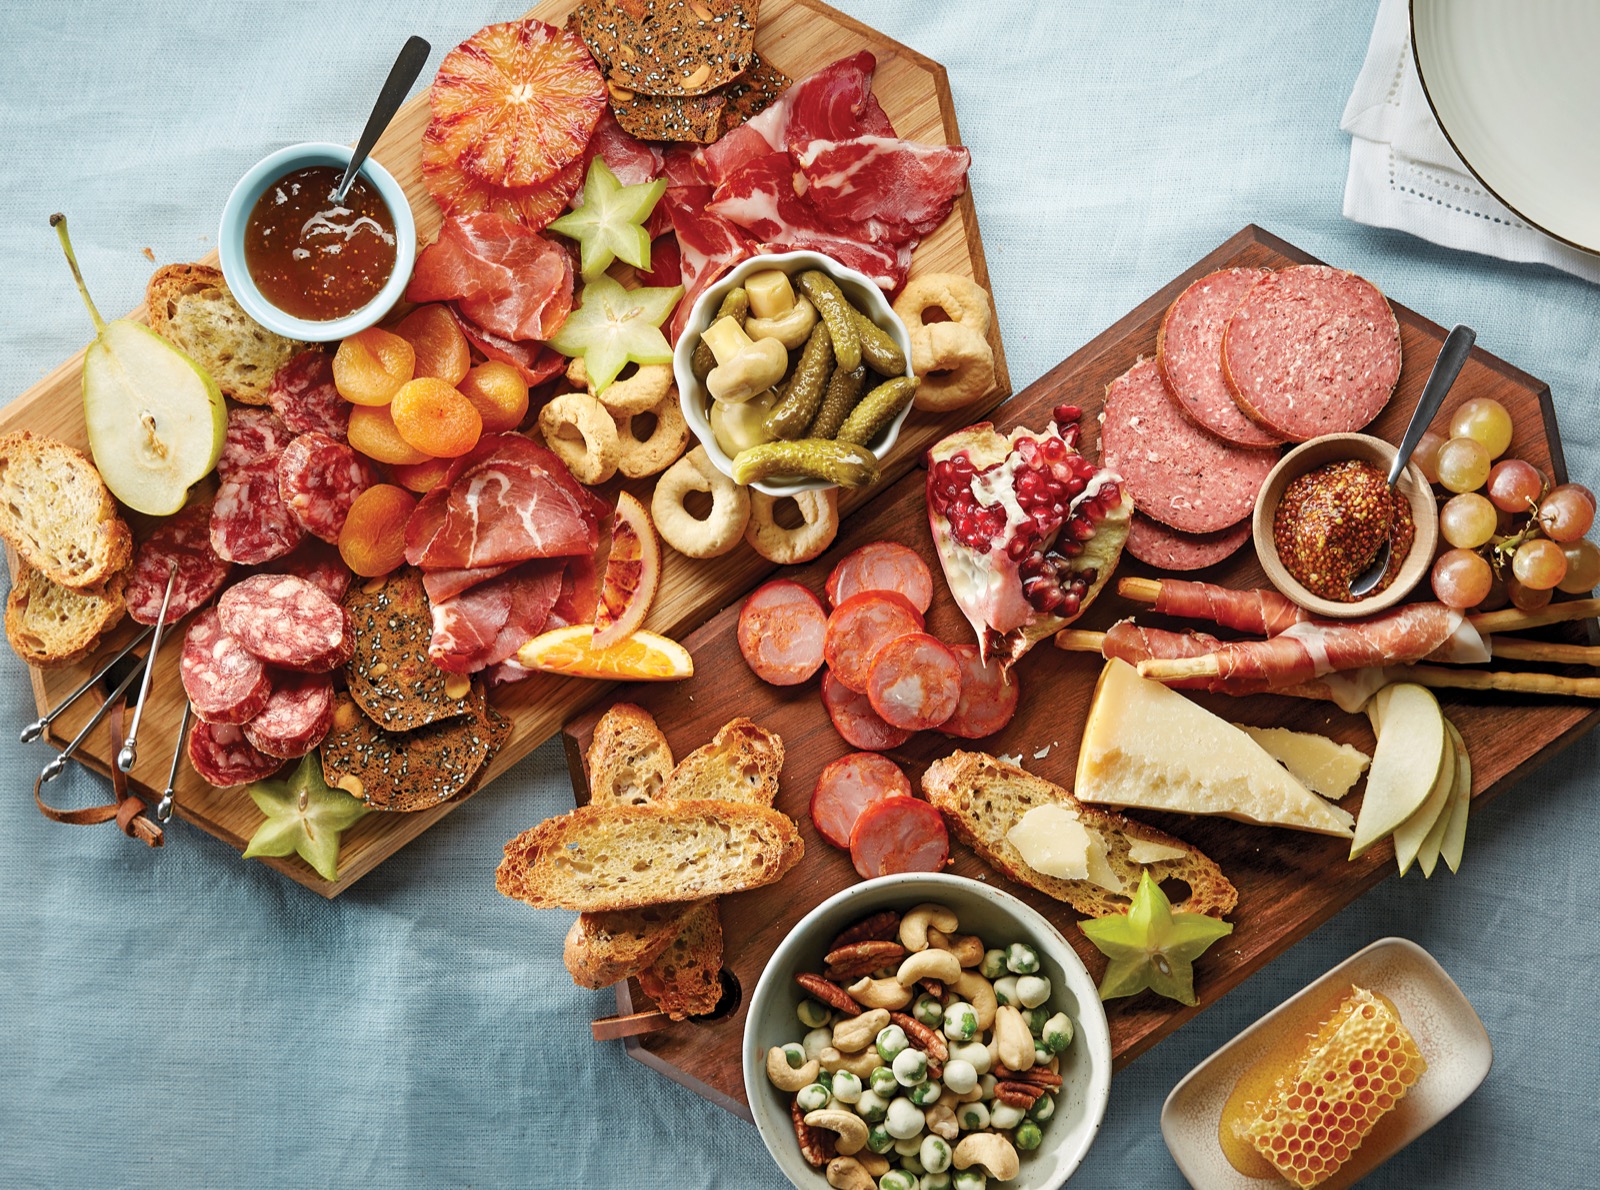 🍴 If You’ve Tried 18/27 of These Foods, You’re a Sophisticated Eater charcuterie board